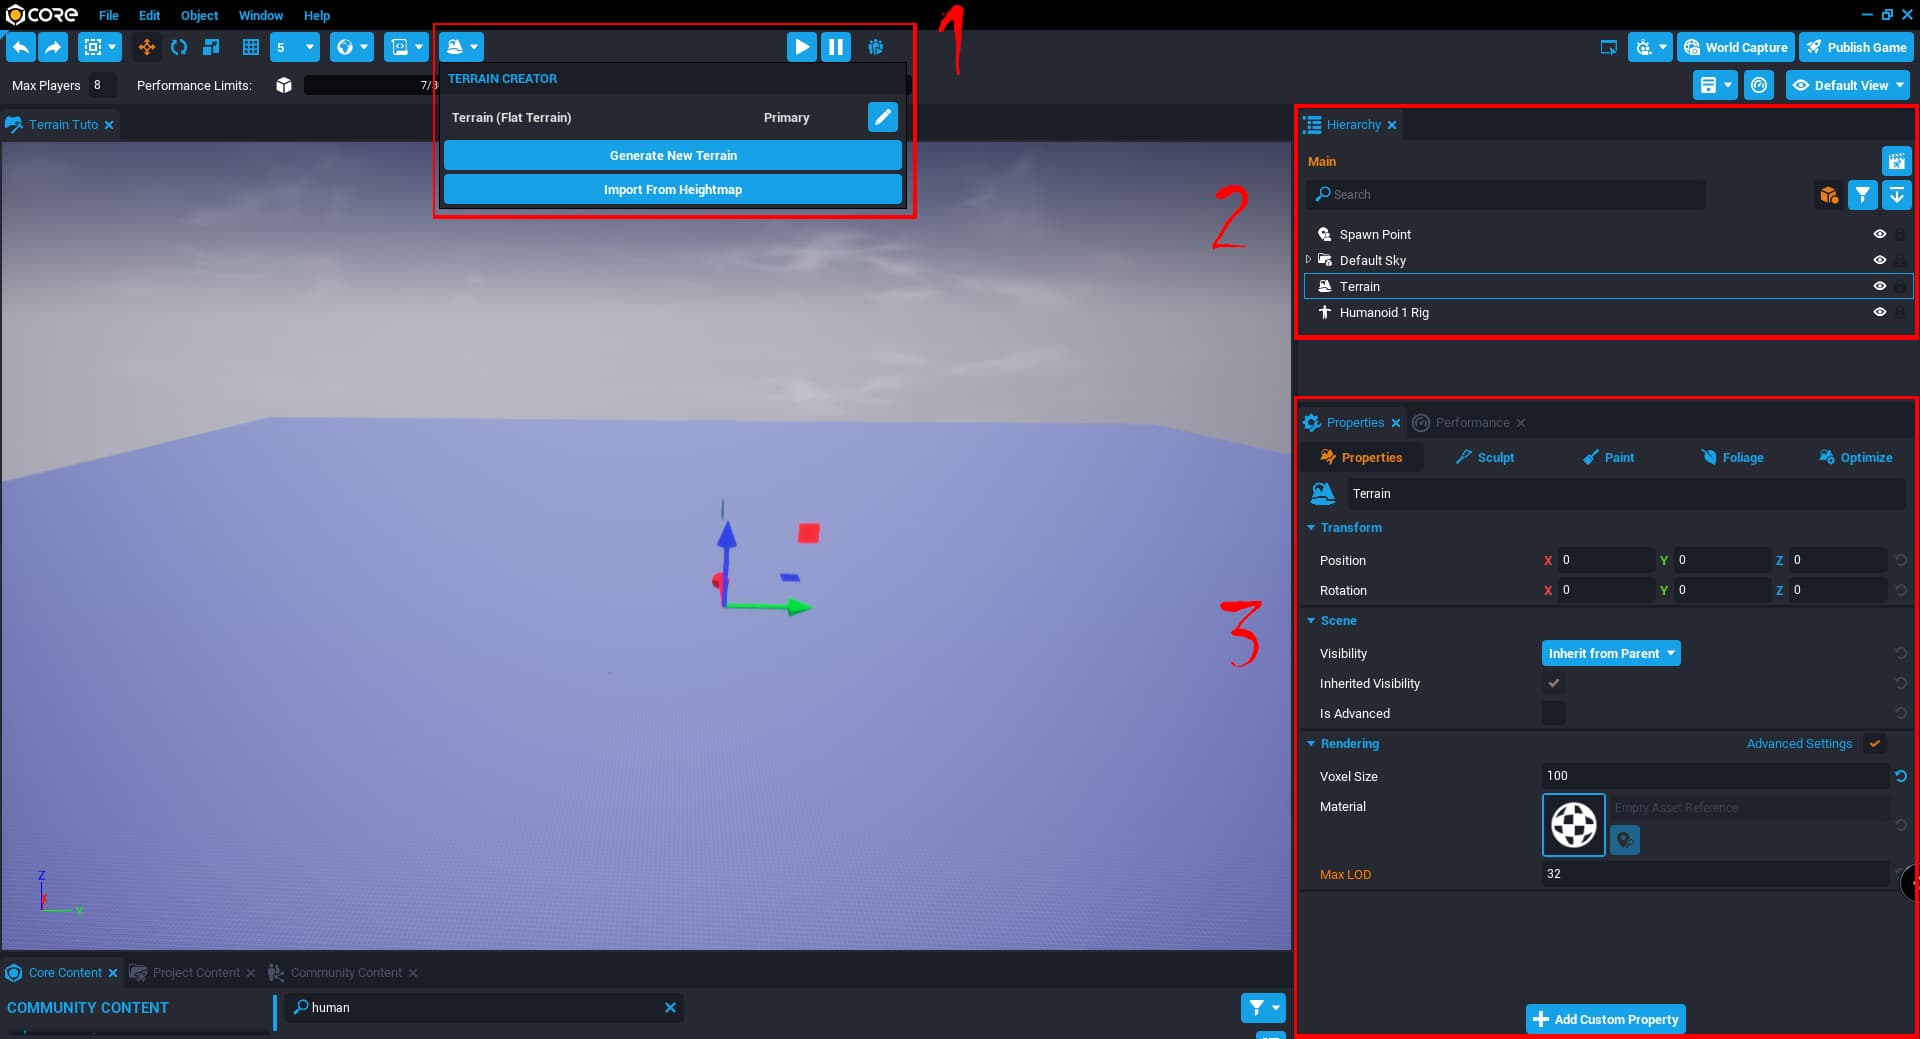 How to Use the Terrain Editor in Roblox Studio (Step-By-Step Guide